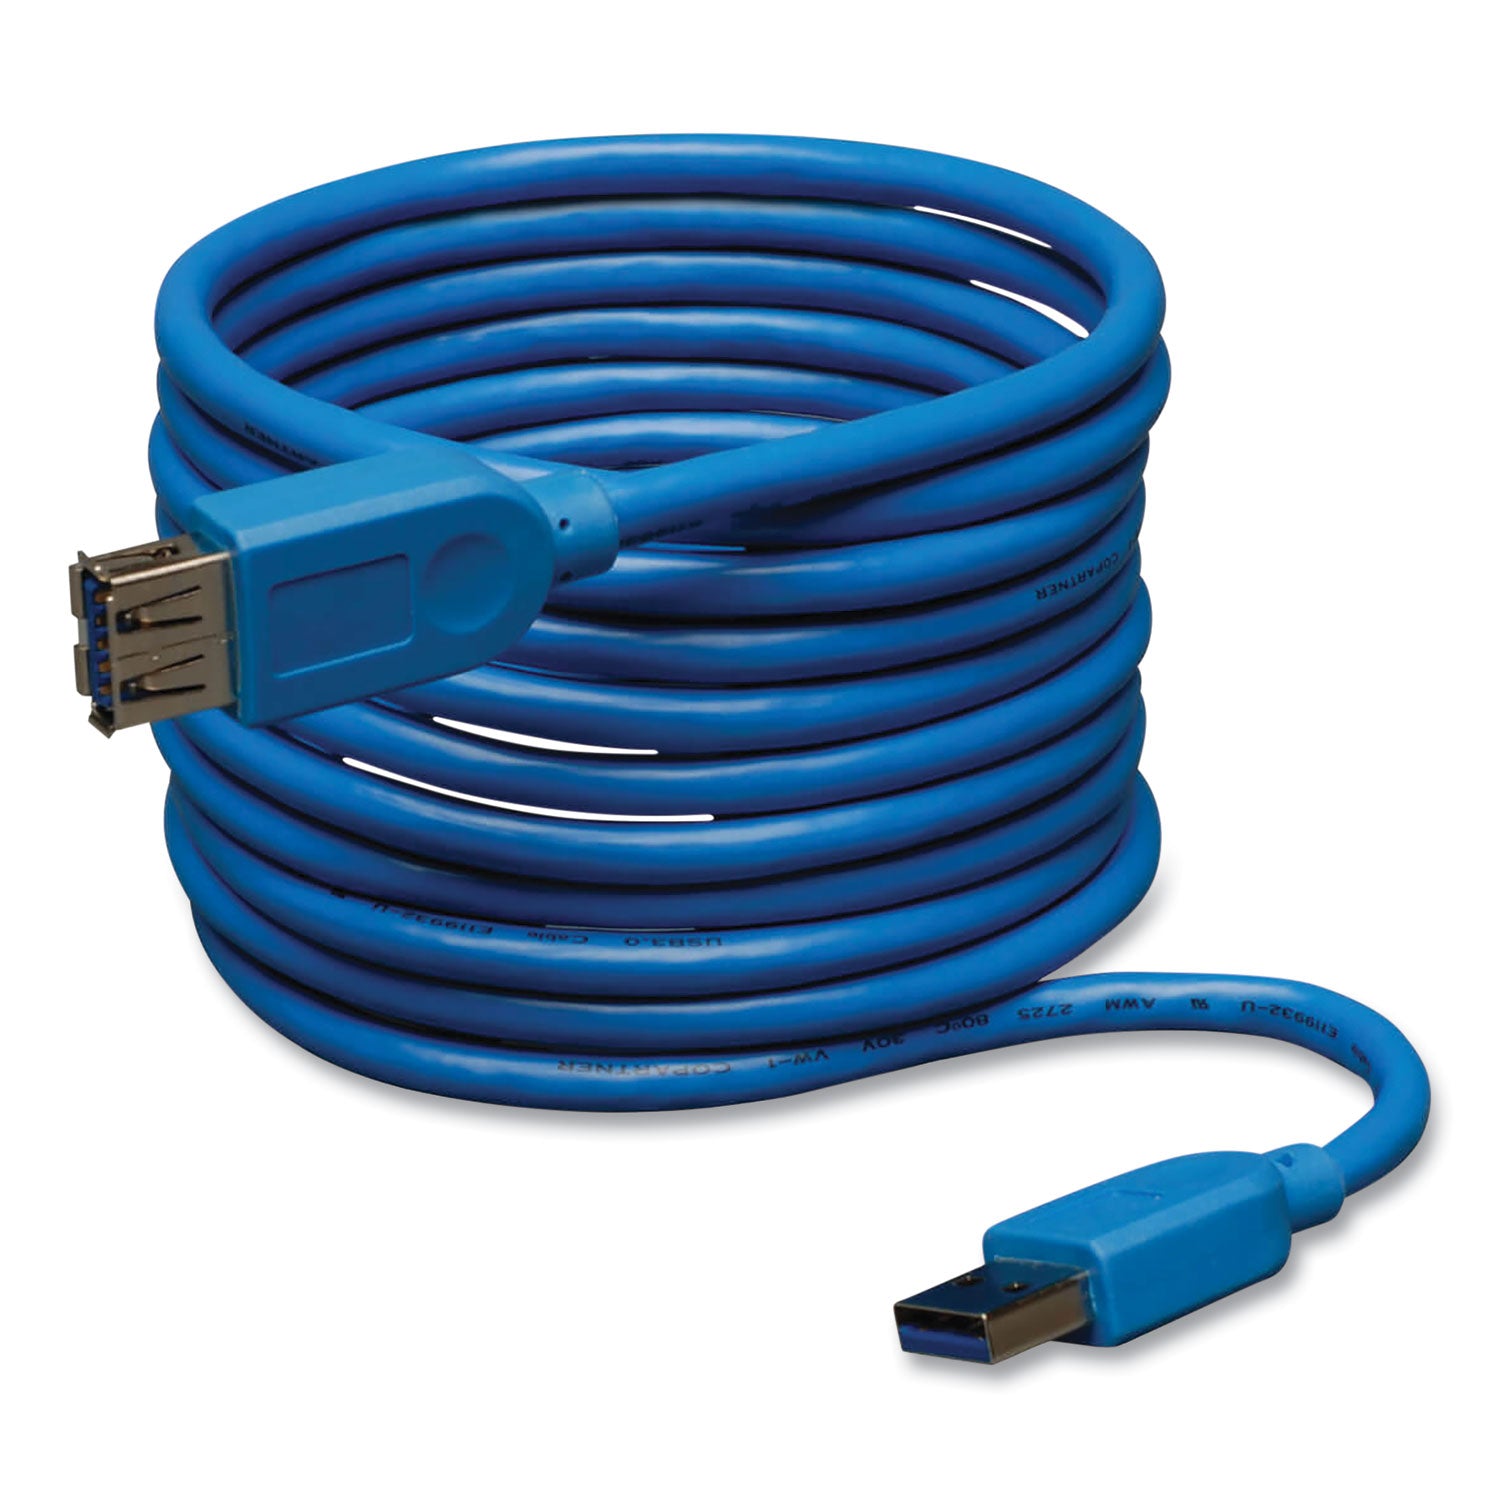 USB 3.0 SuperSpeed Extension Cable, 10 ft, Blue - 